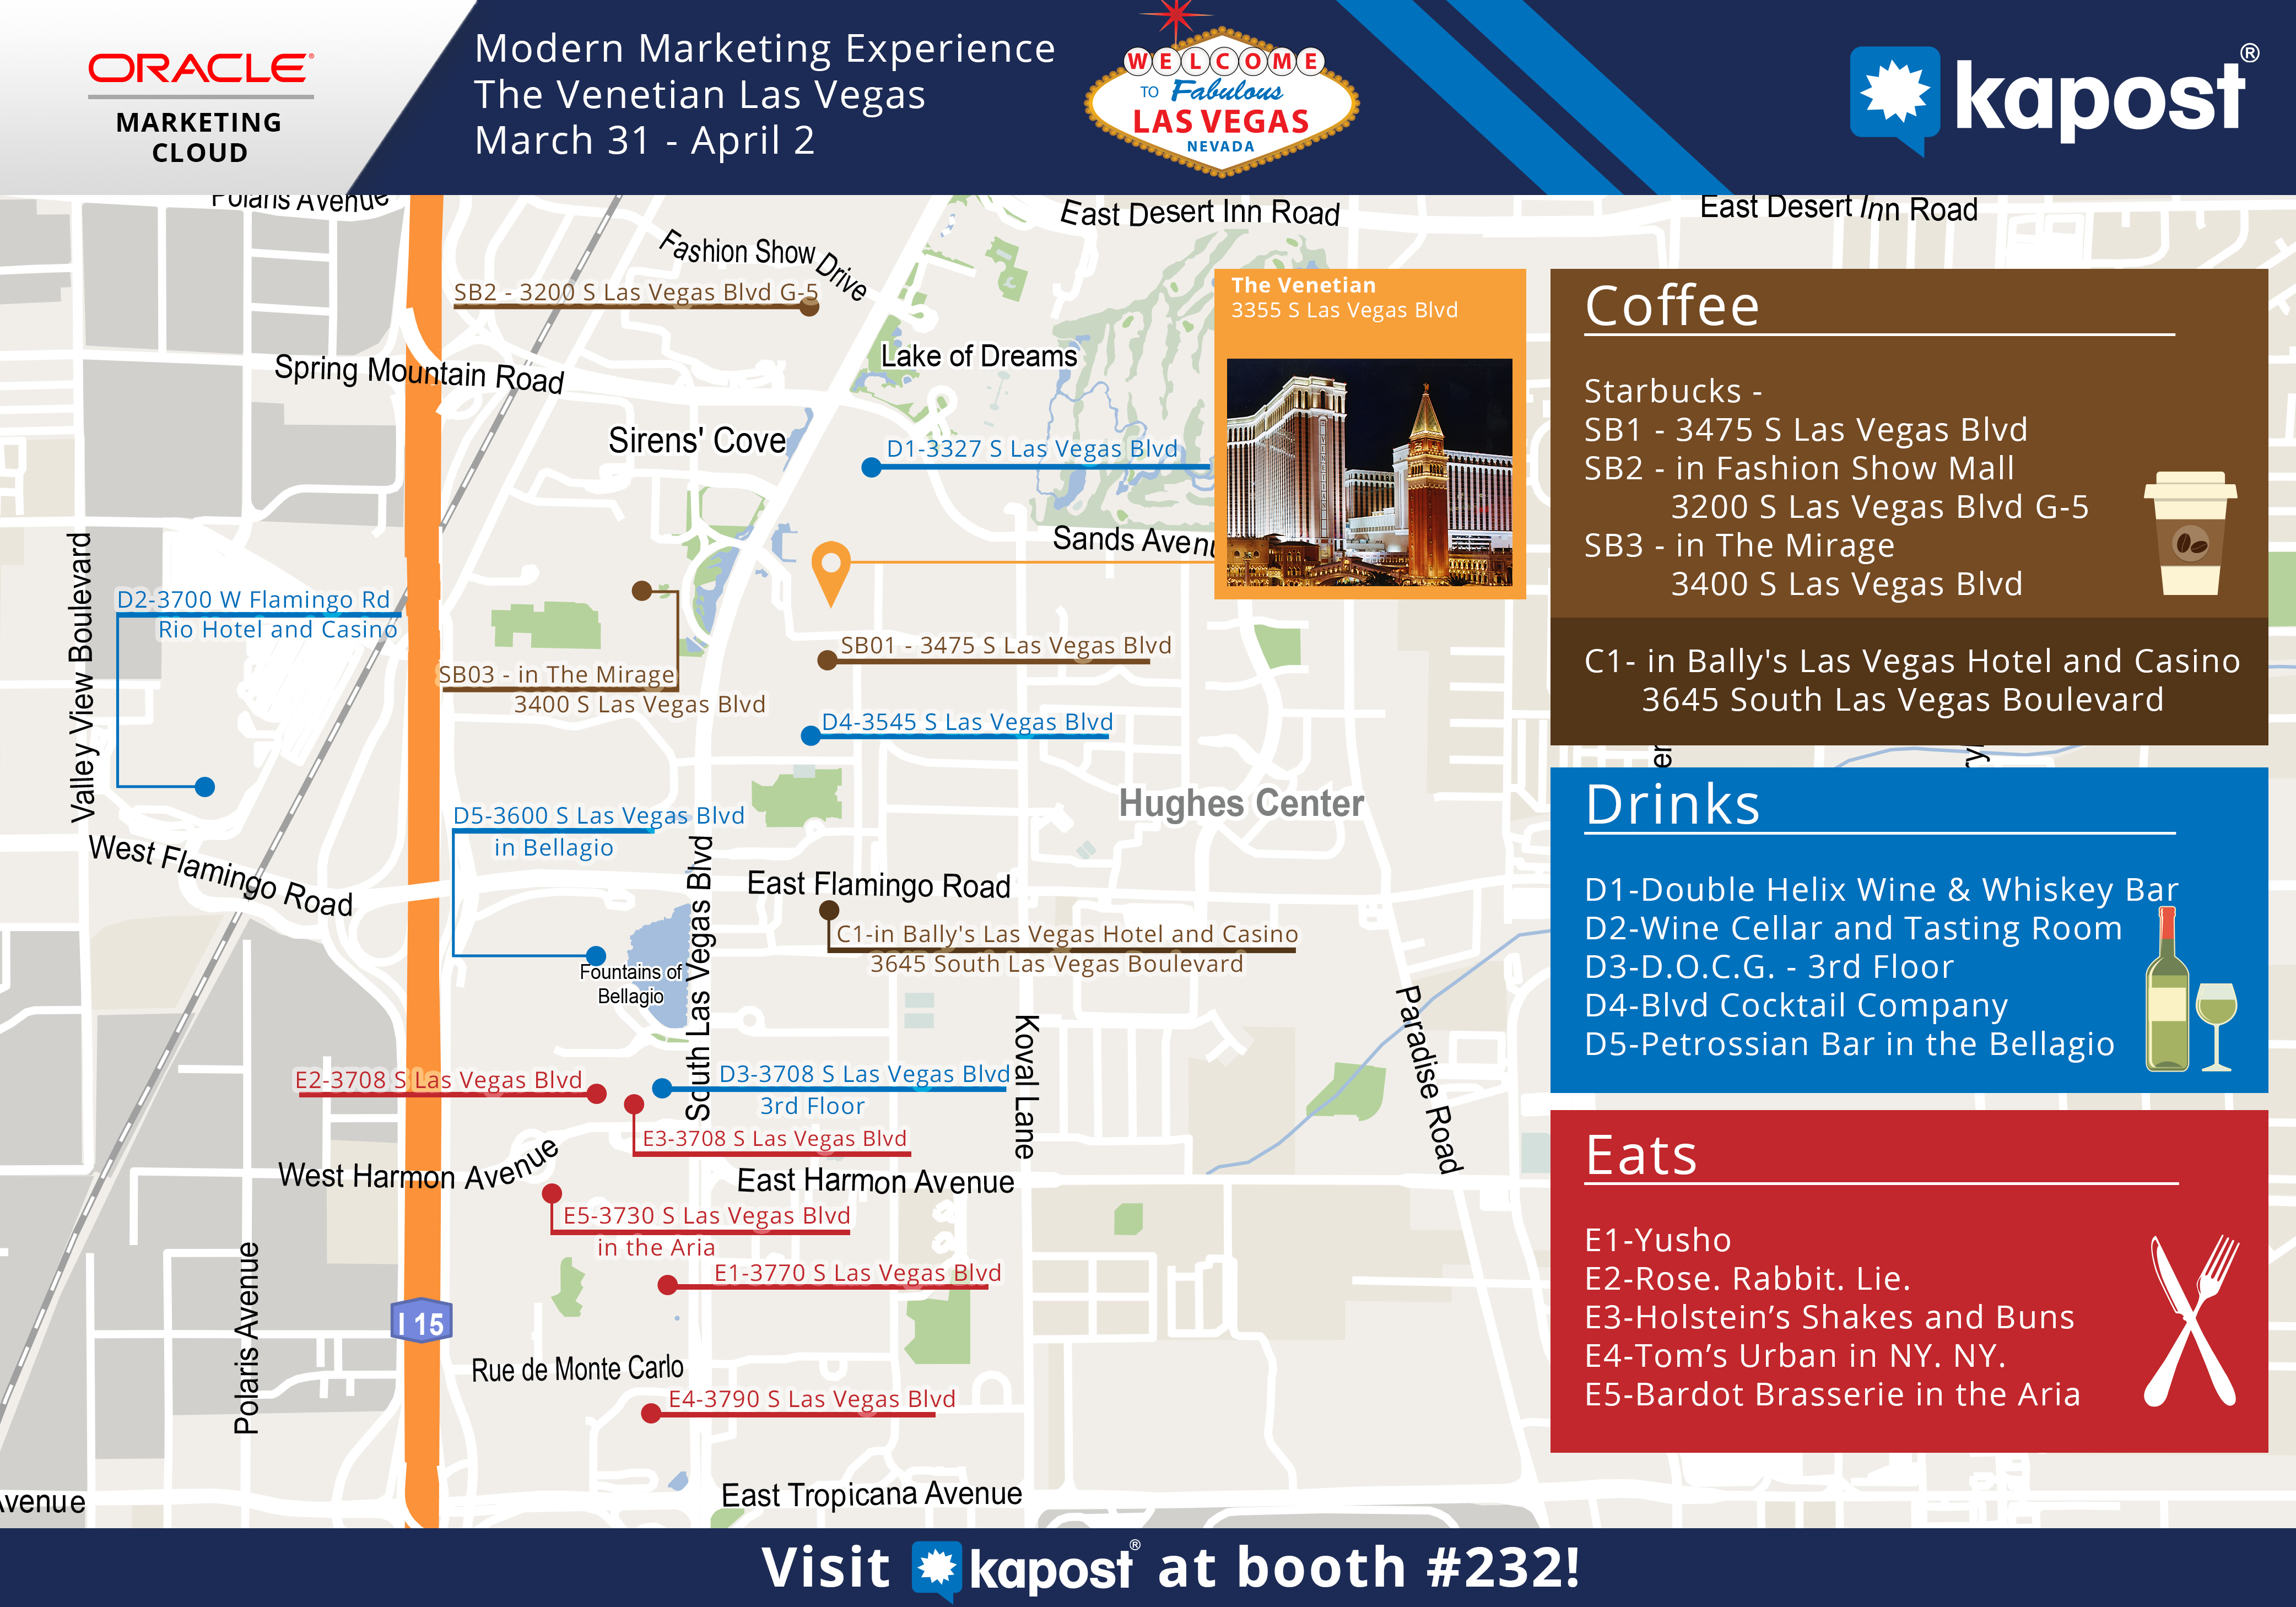 Your guide to Oracle Modern Marketing Experience 2015!